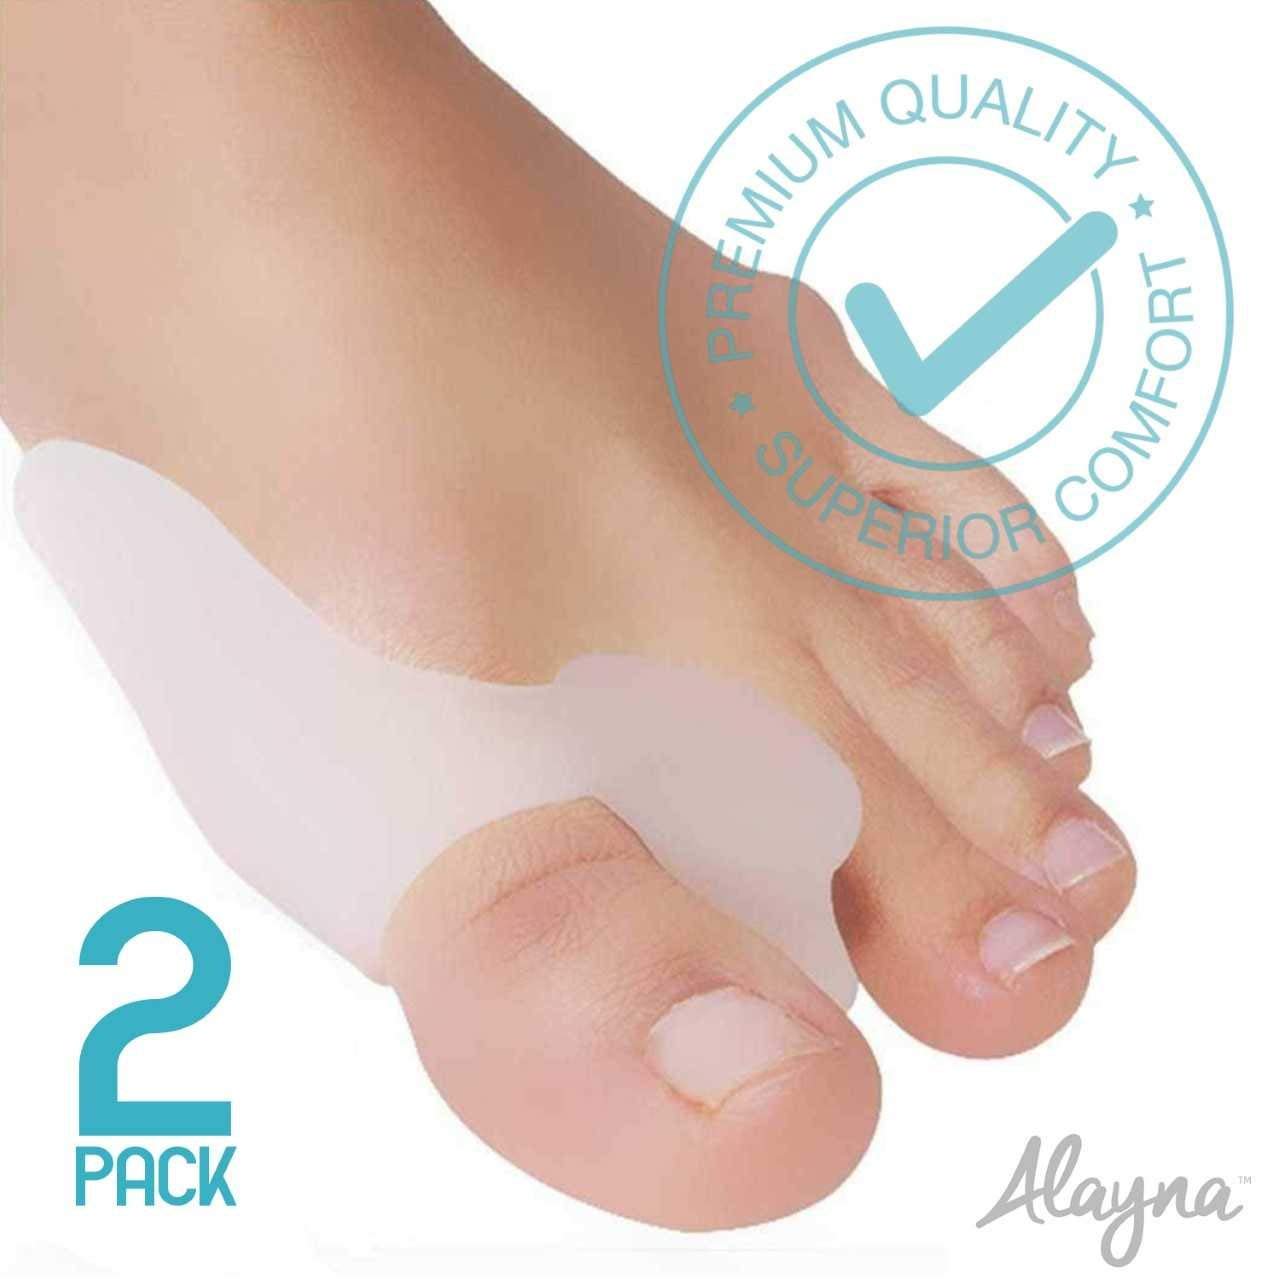 Bunion Corrector and the Bunion Relief Gel Toe separator